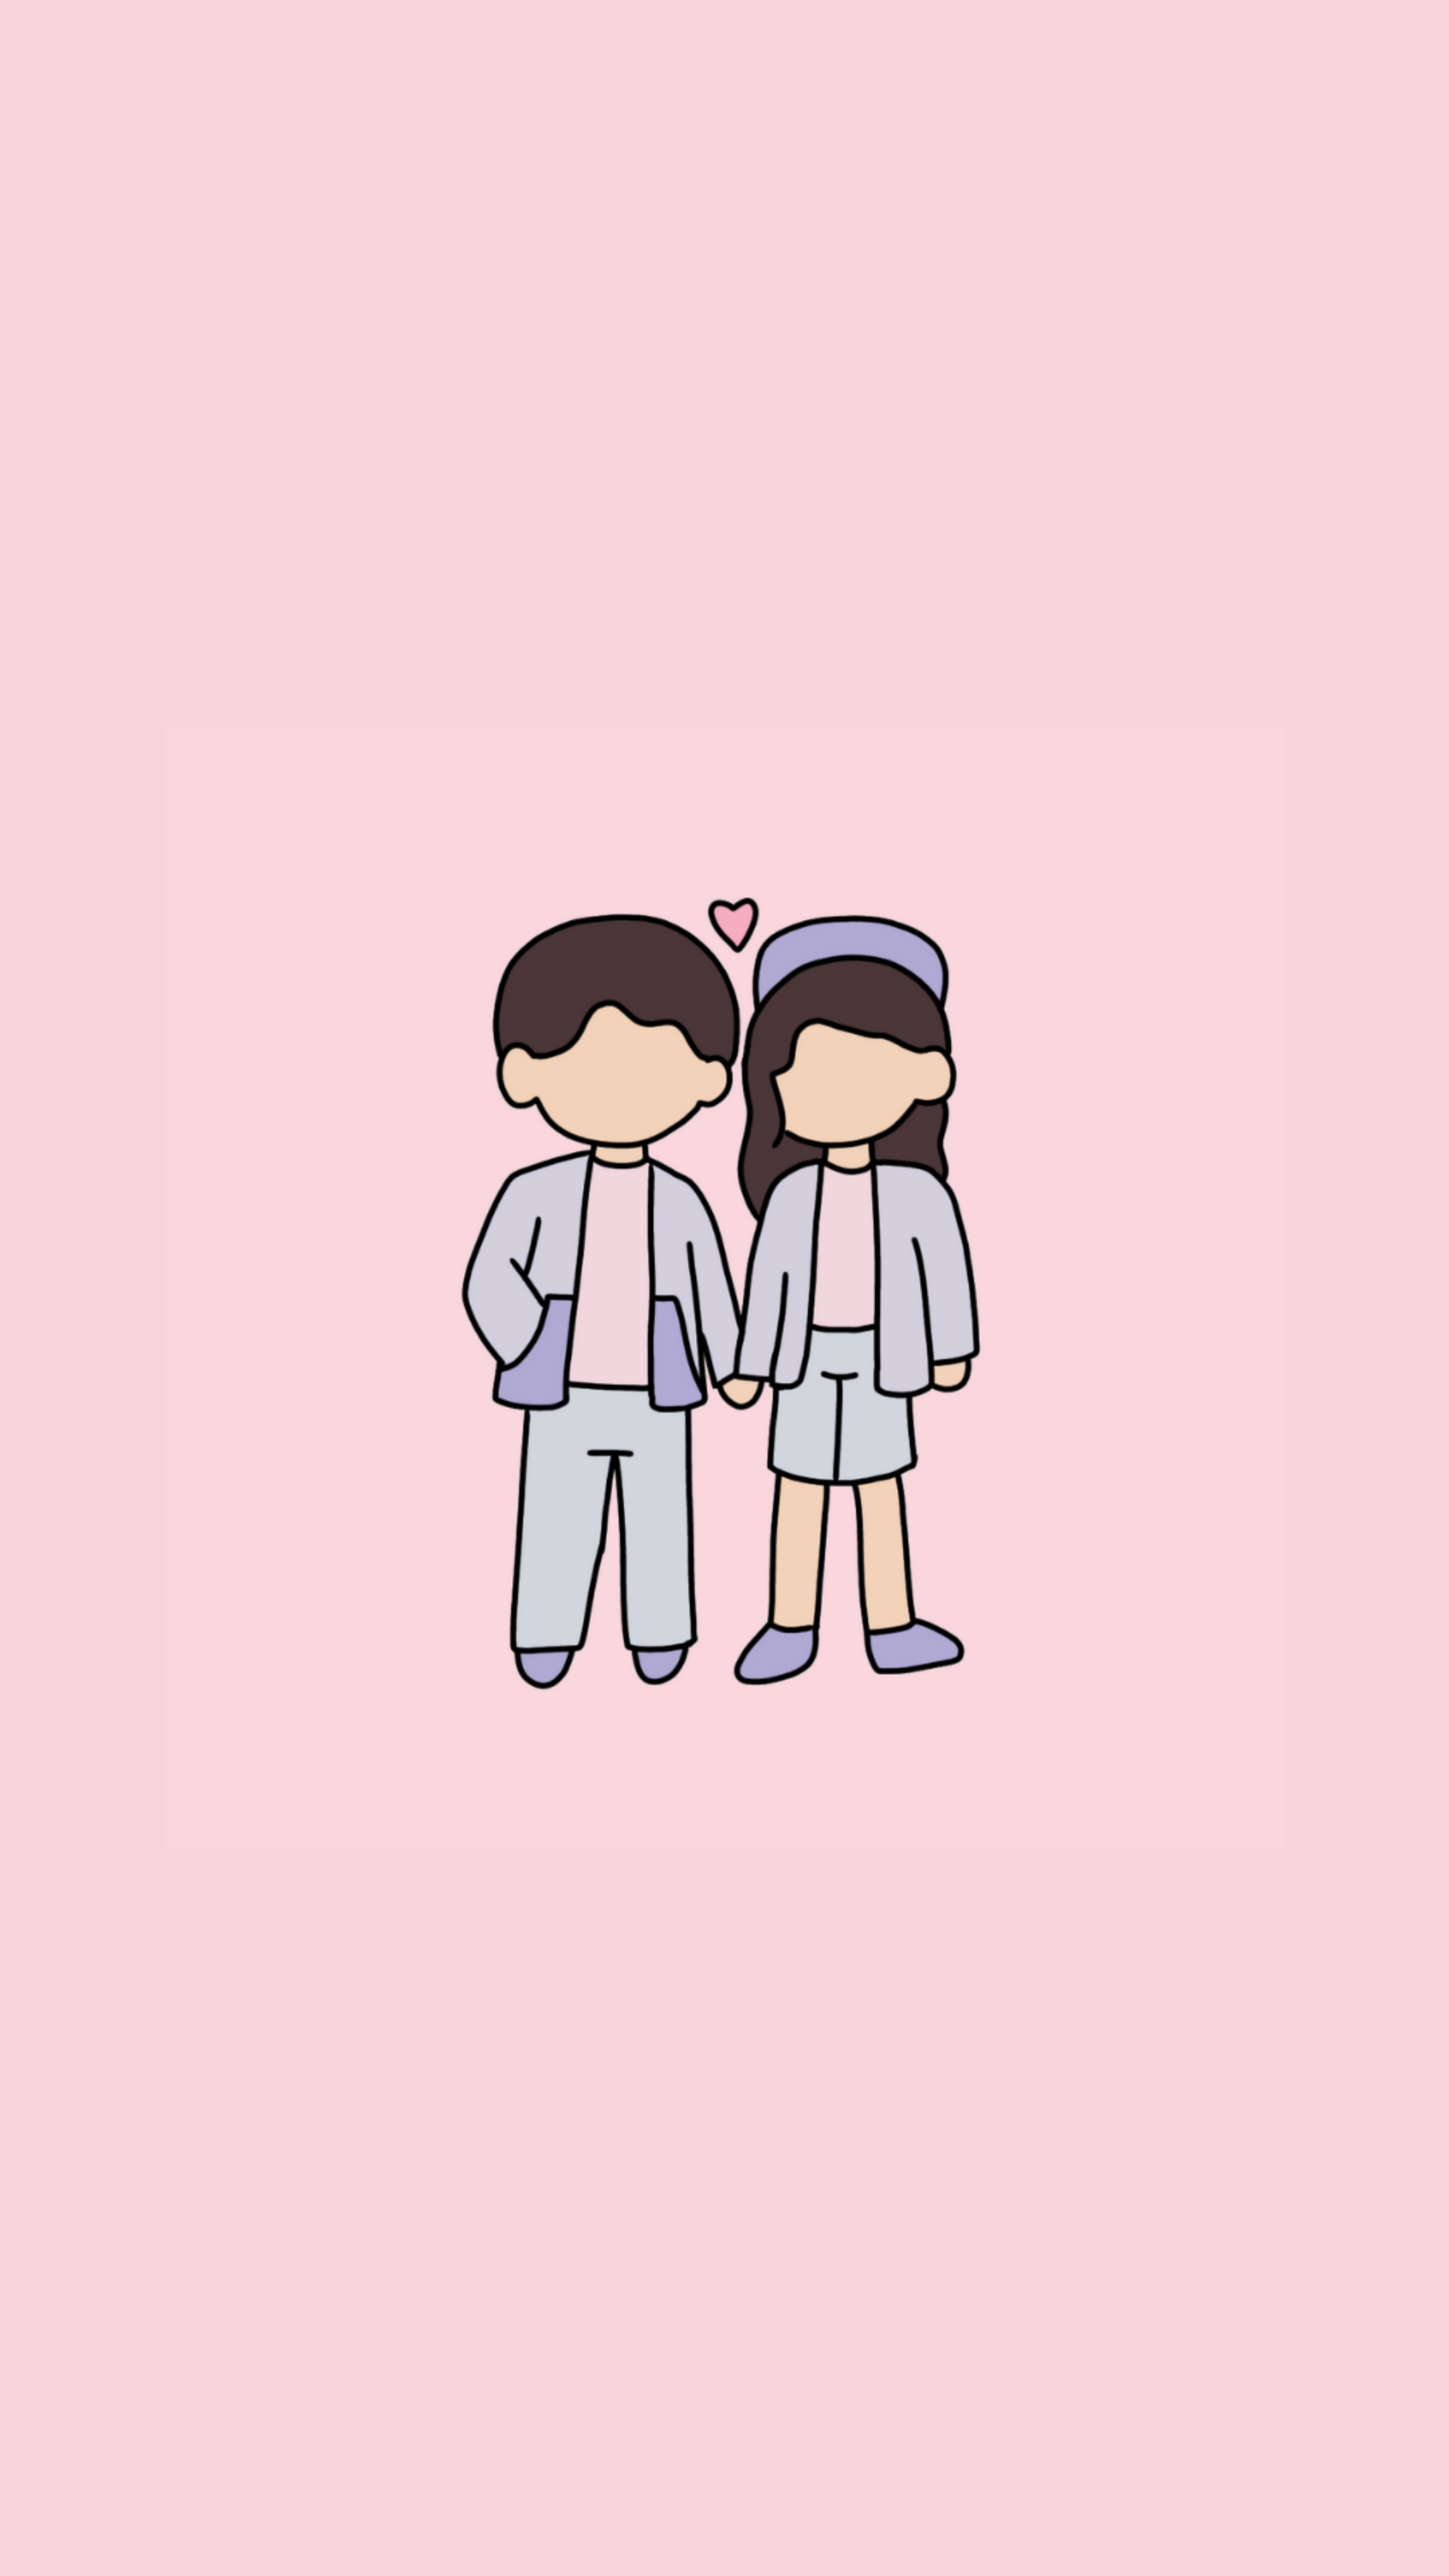 ivoci - Free Download: Cute Couple Illustration Phone Wallpapers - 5